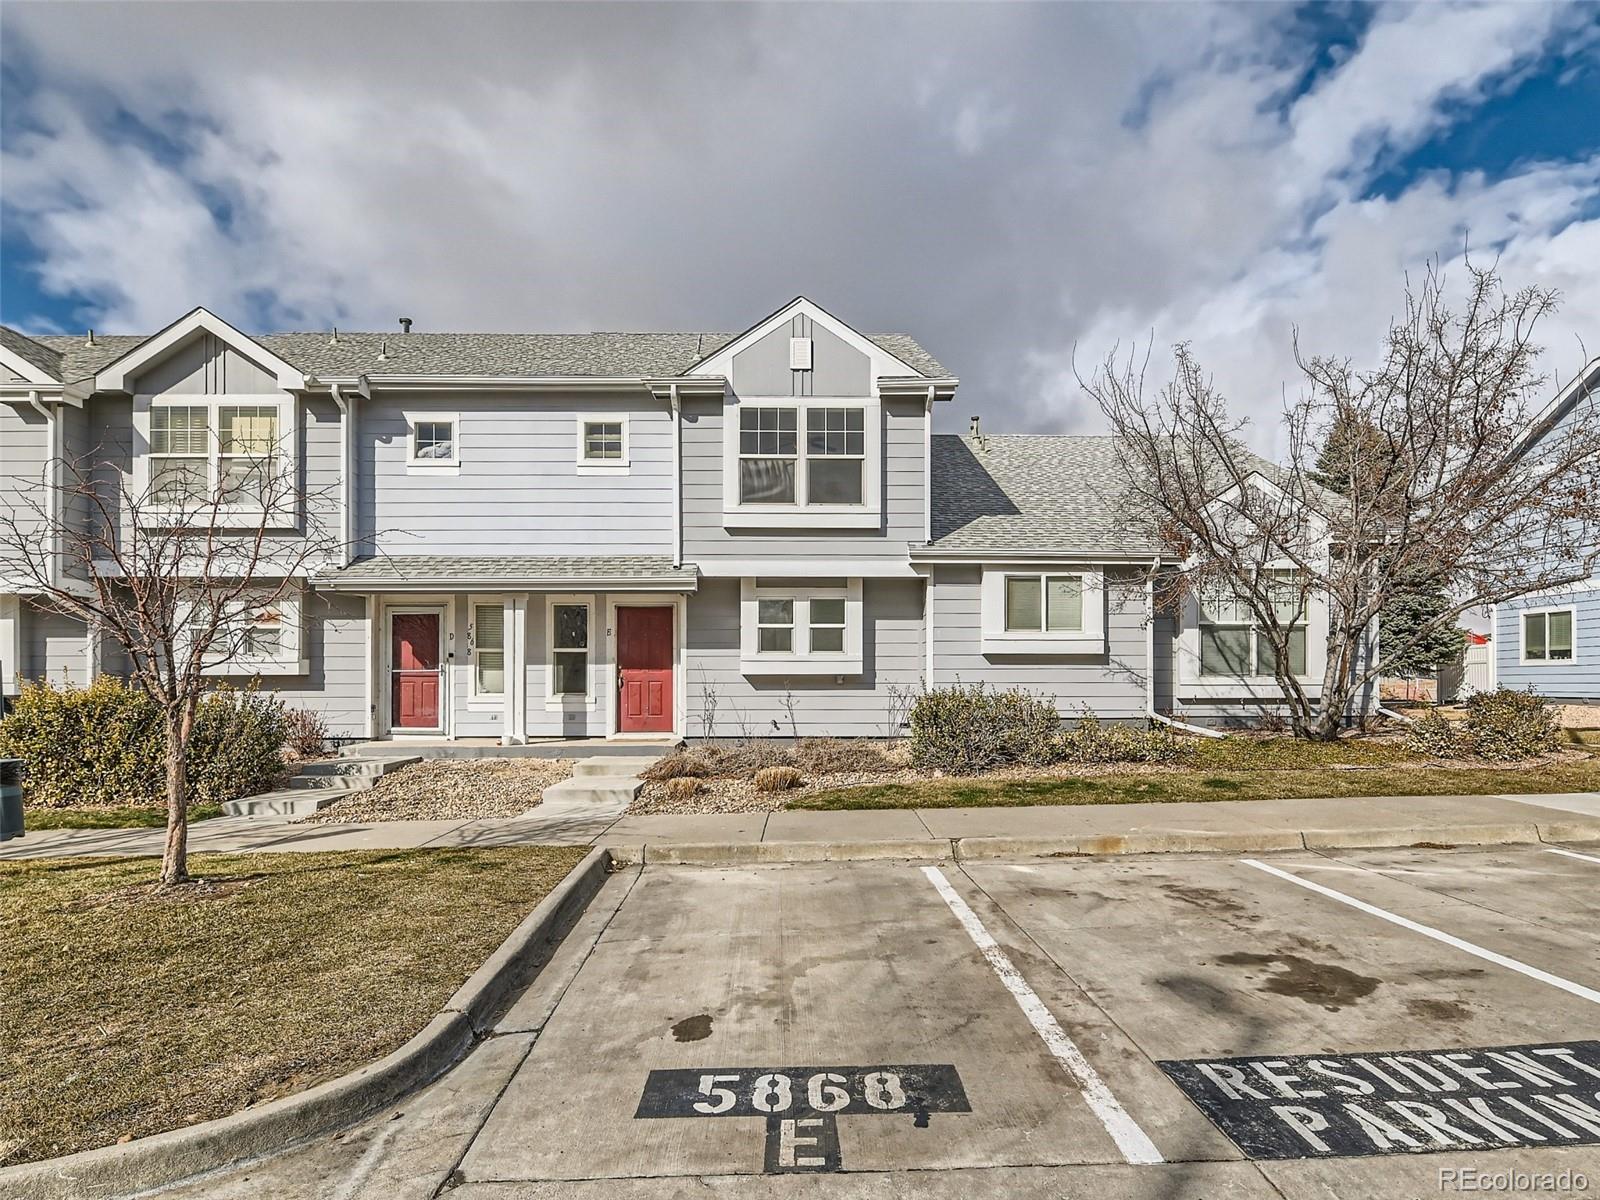 5868  biscay street, denver sold home. Closed on 2024-04-17 for $375,000.